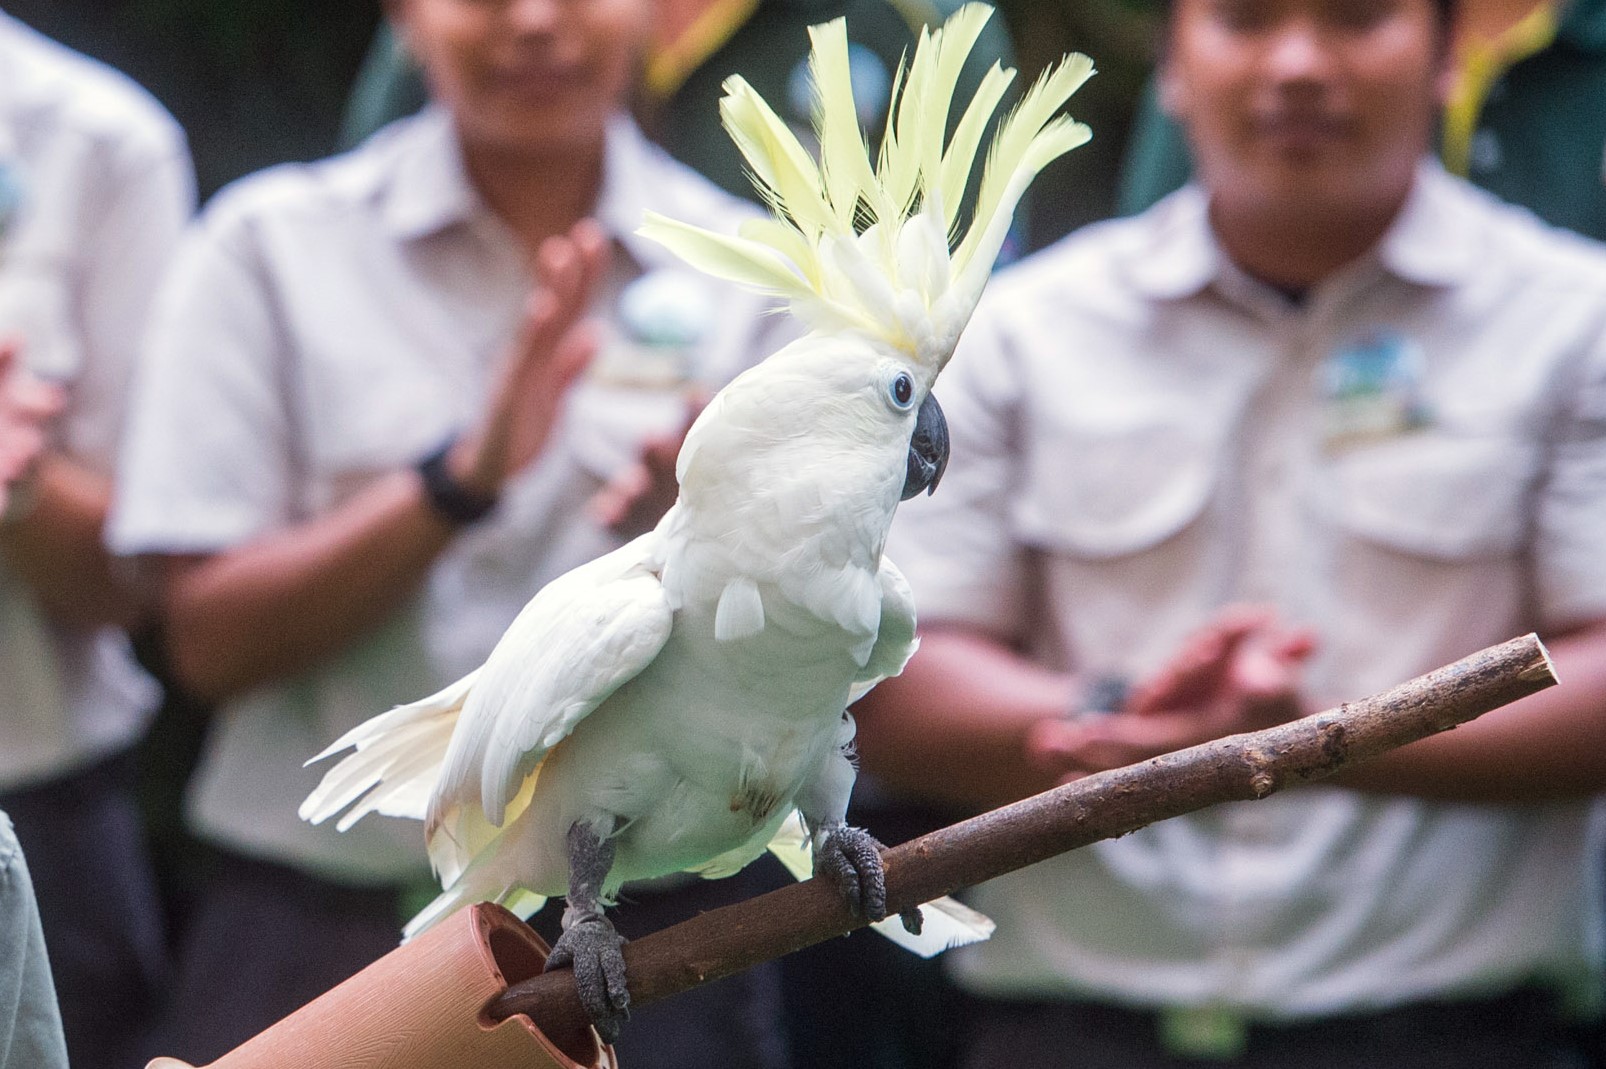 Jurong Bird Park’s oldest cockatoo, Big John, is older than the park itself as he was already an adult when the park first opened in 1971. The pioneer bird made special appearances at the JBP50 edition of the High Flyers presentation.